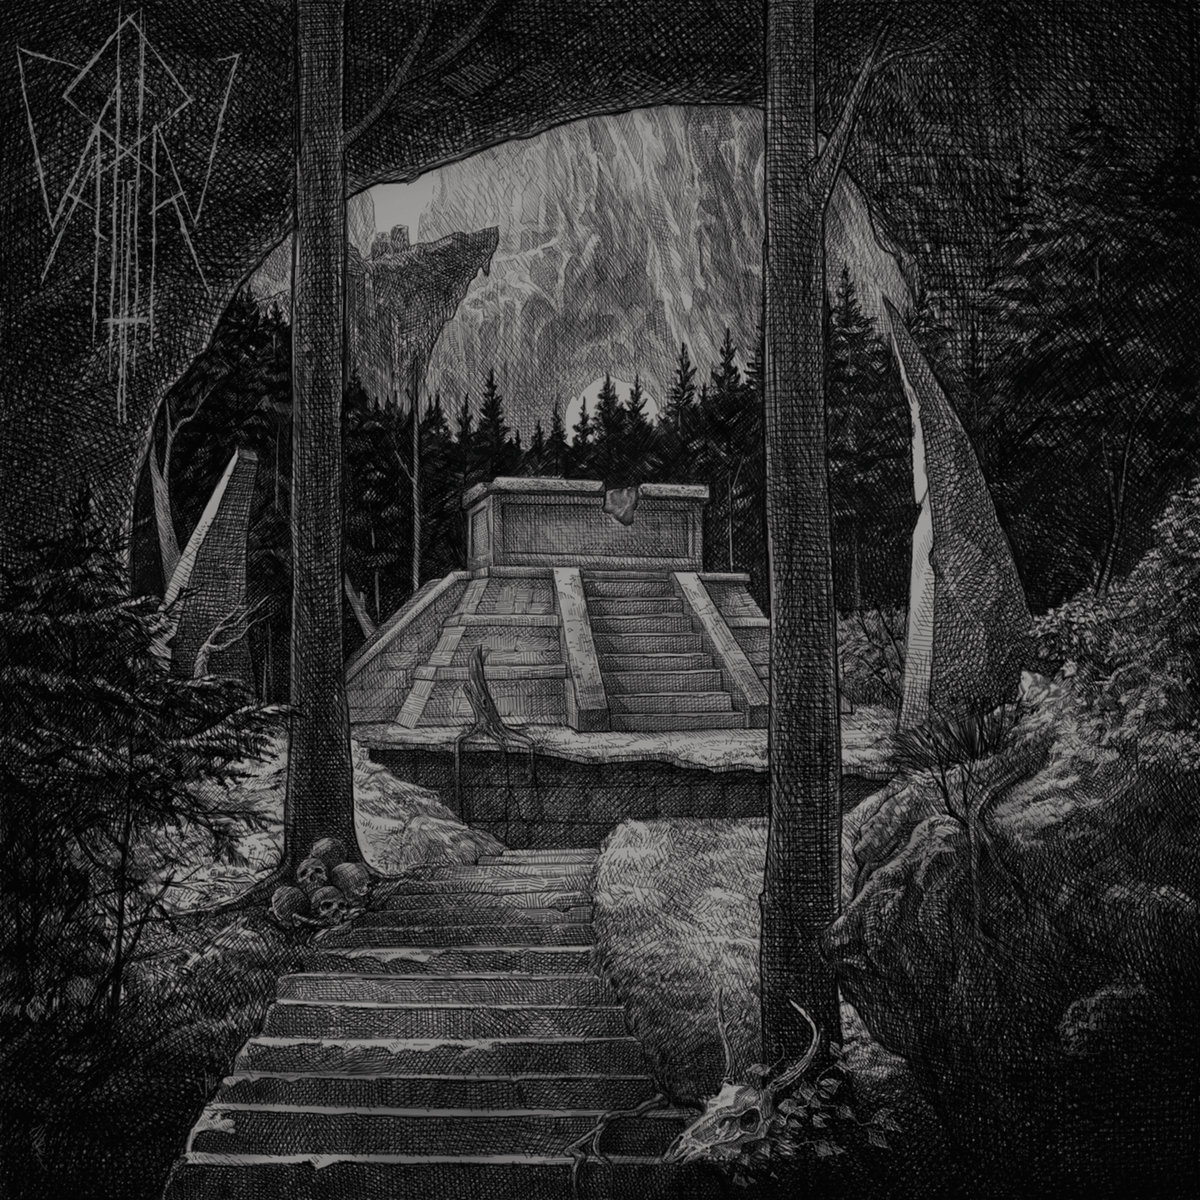 BARREN ALTAR primer adelanto de su debut “Entrenched In The Faults Of The Earth”